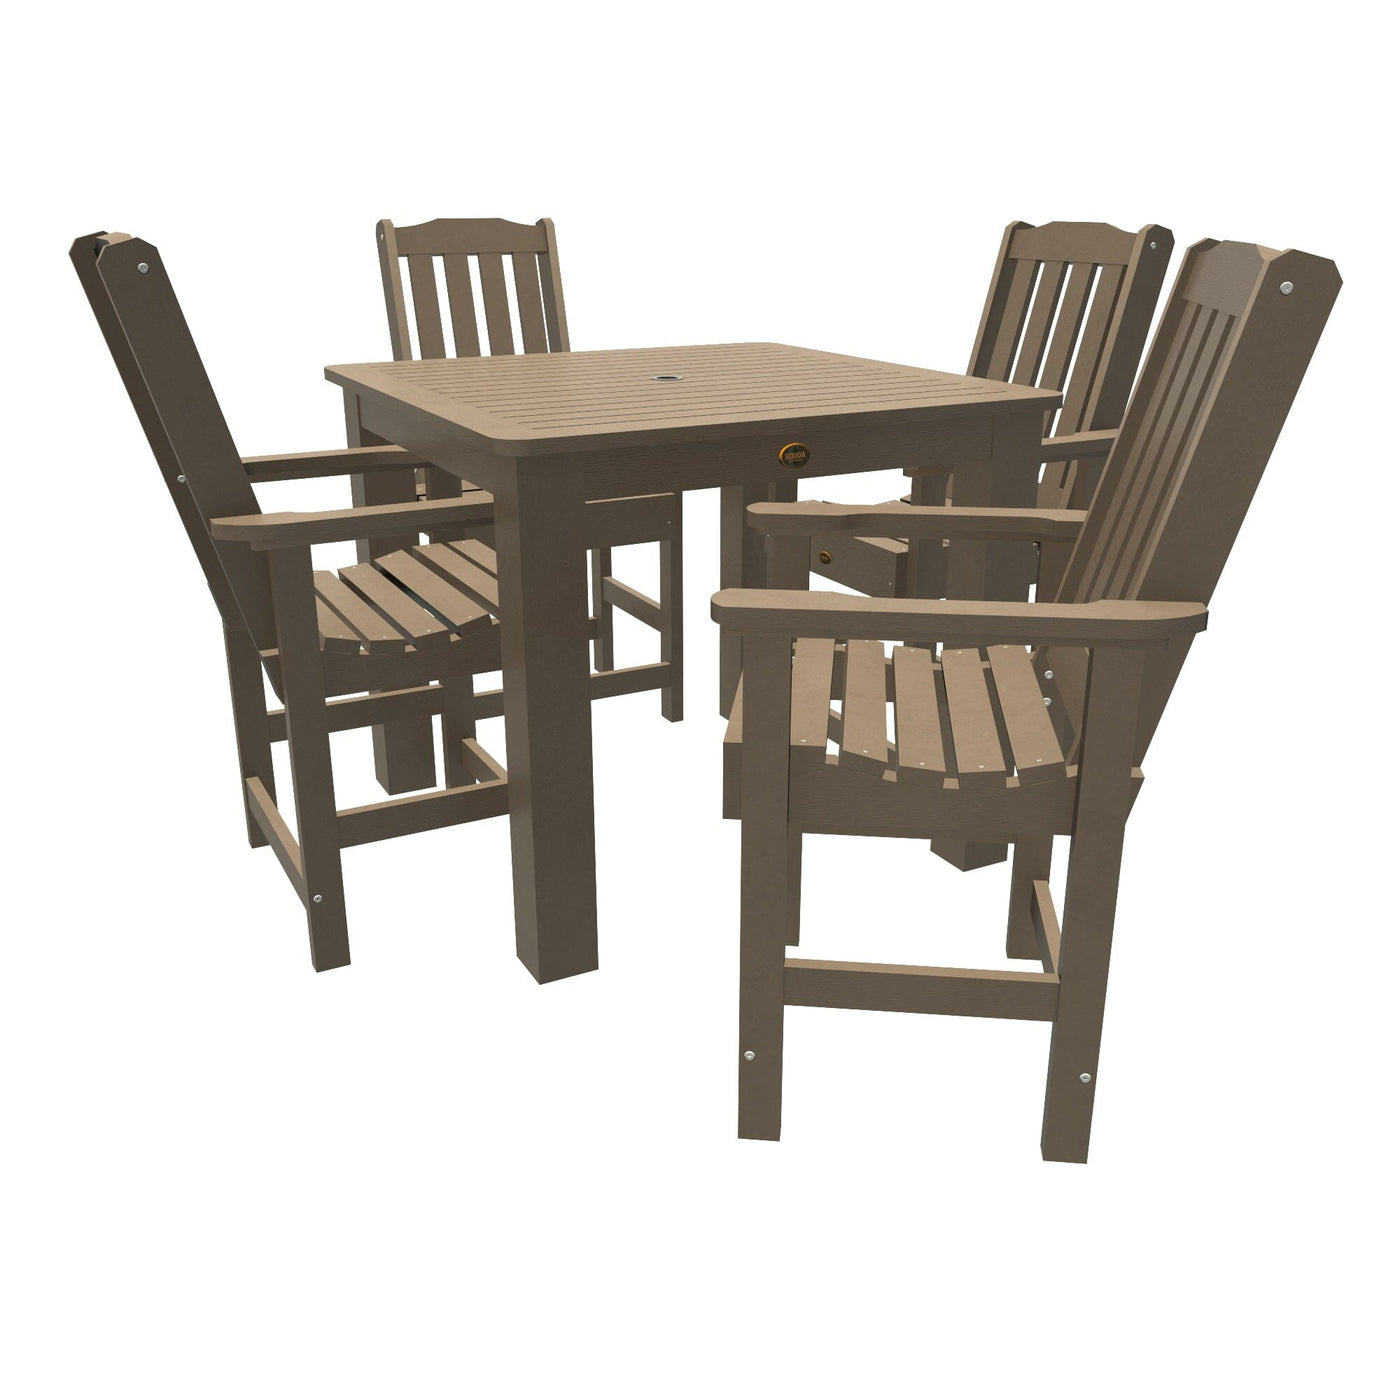 Springville 5pc Square Counter Dining Set Dining Sequoia Professional Woodland Brown 